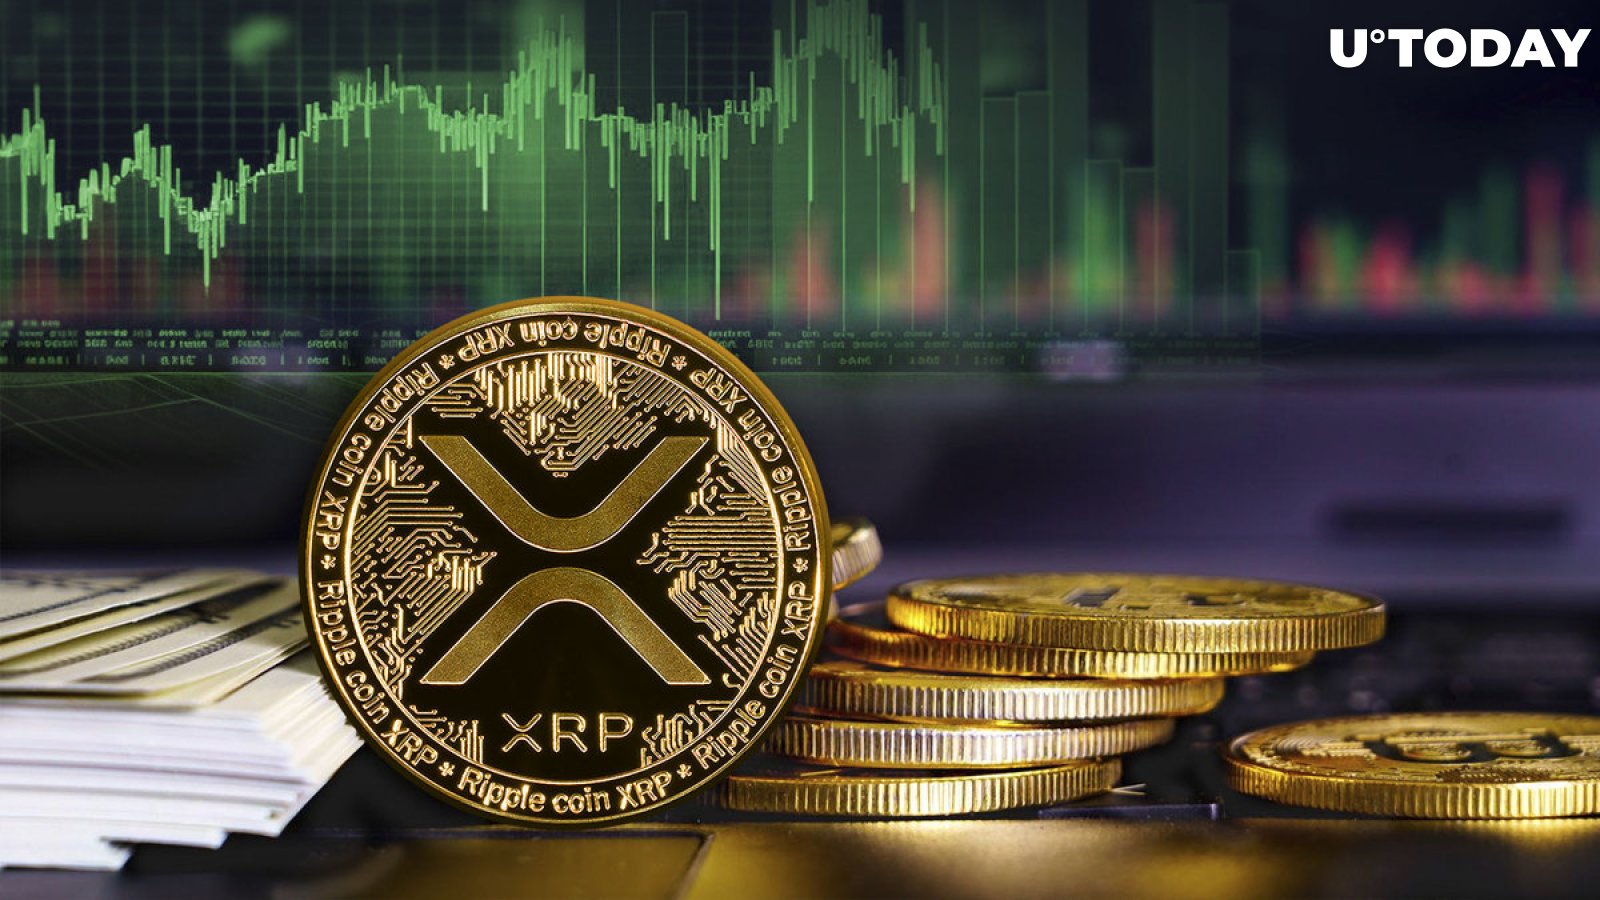 XRP reaches new milestone of 5.2 million active wallets